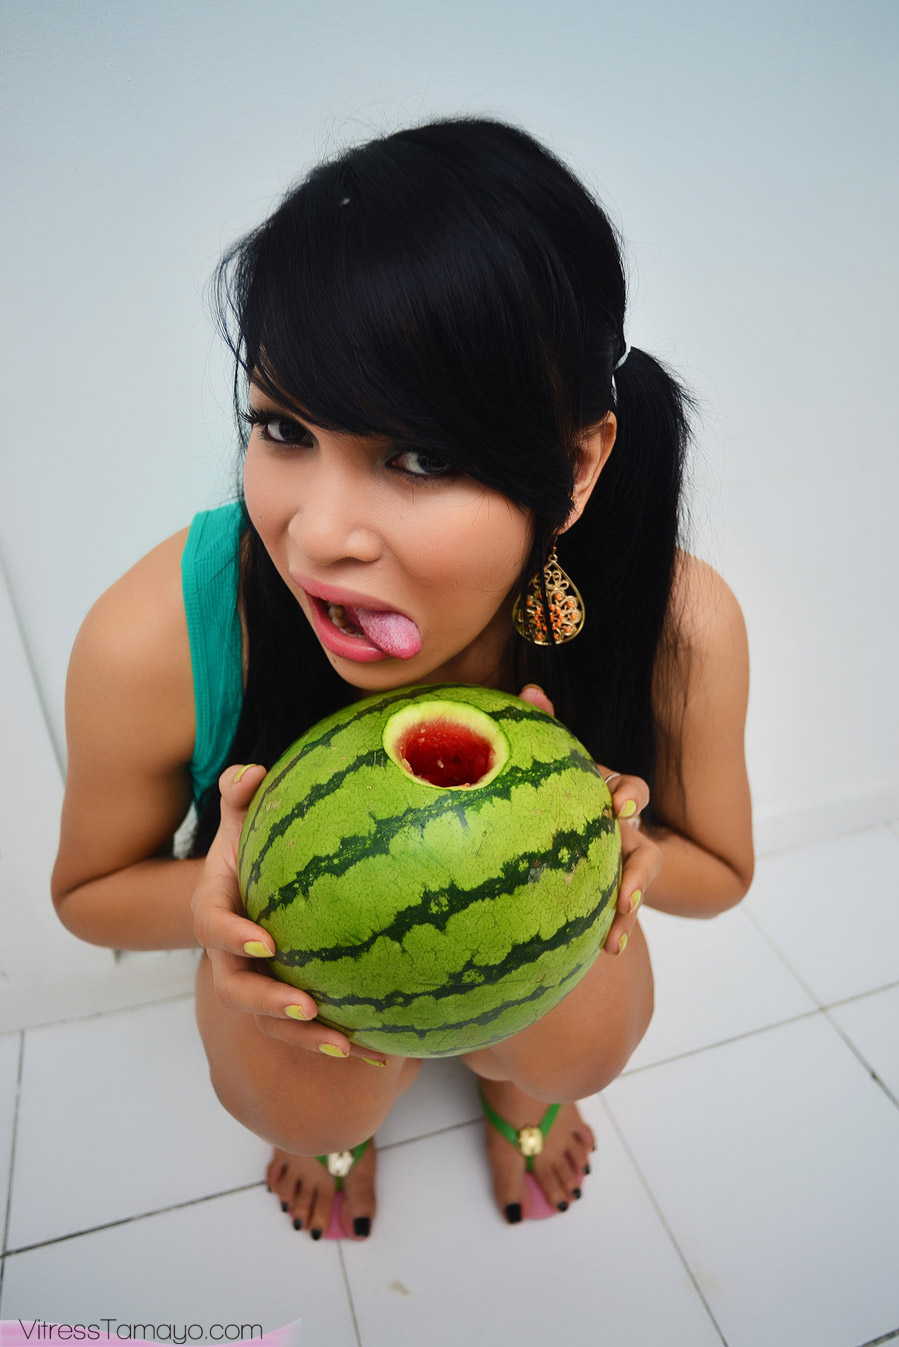 Petite Asian shemale with Big Tits fucking a watermelon - ShemaleTubeVideos